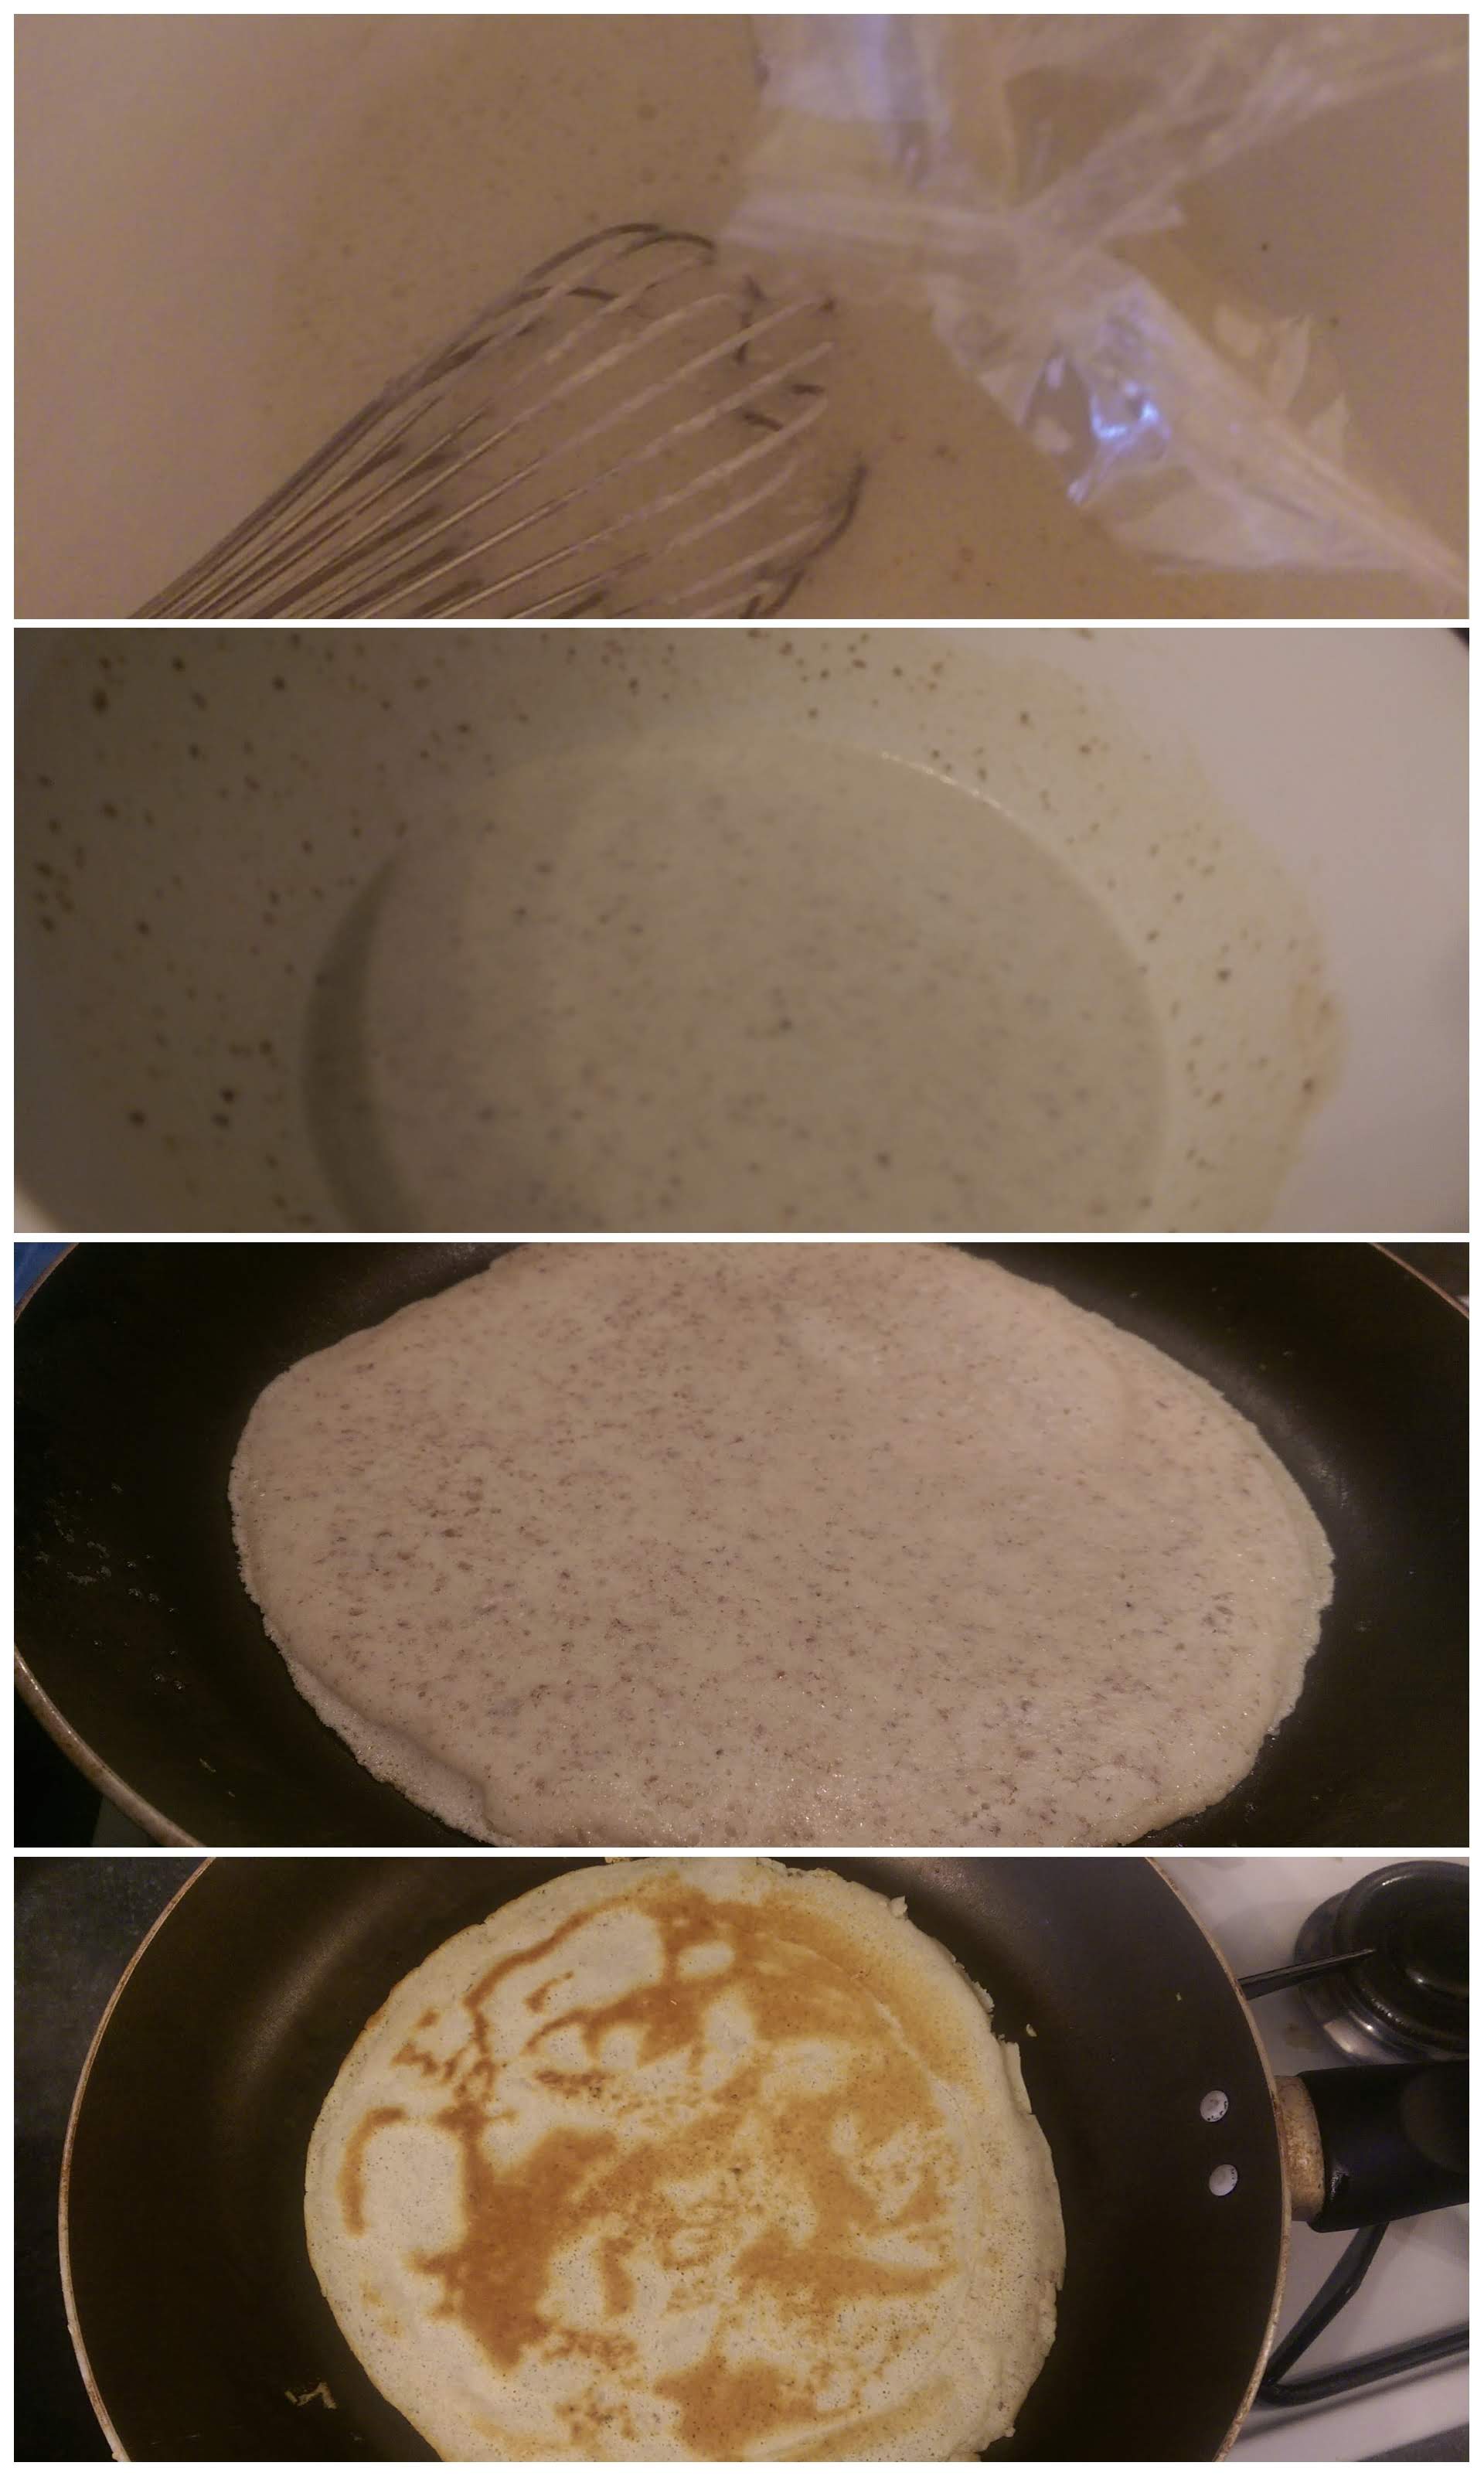 Read my review of these Gluten-free, Vegan and Non GMO pancakes, I'm using to do pancake day the healthy way! By Helen's Journey Blog